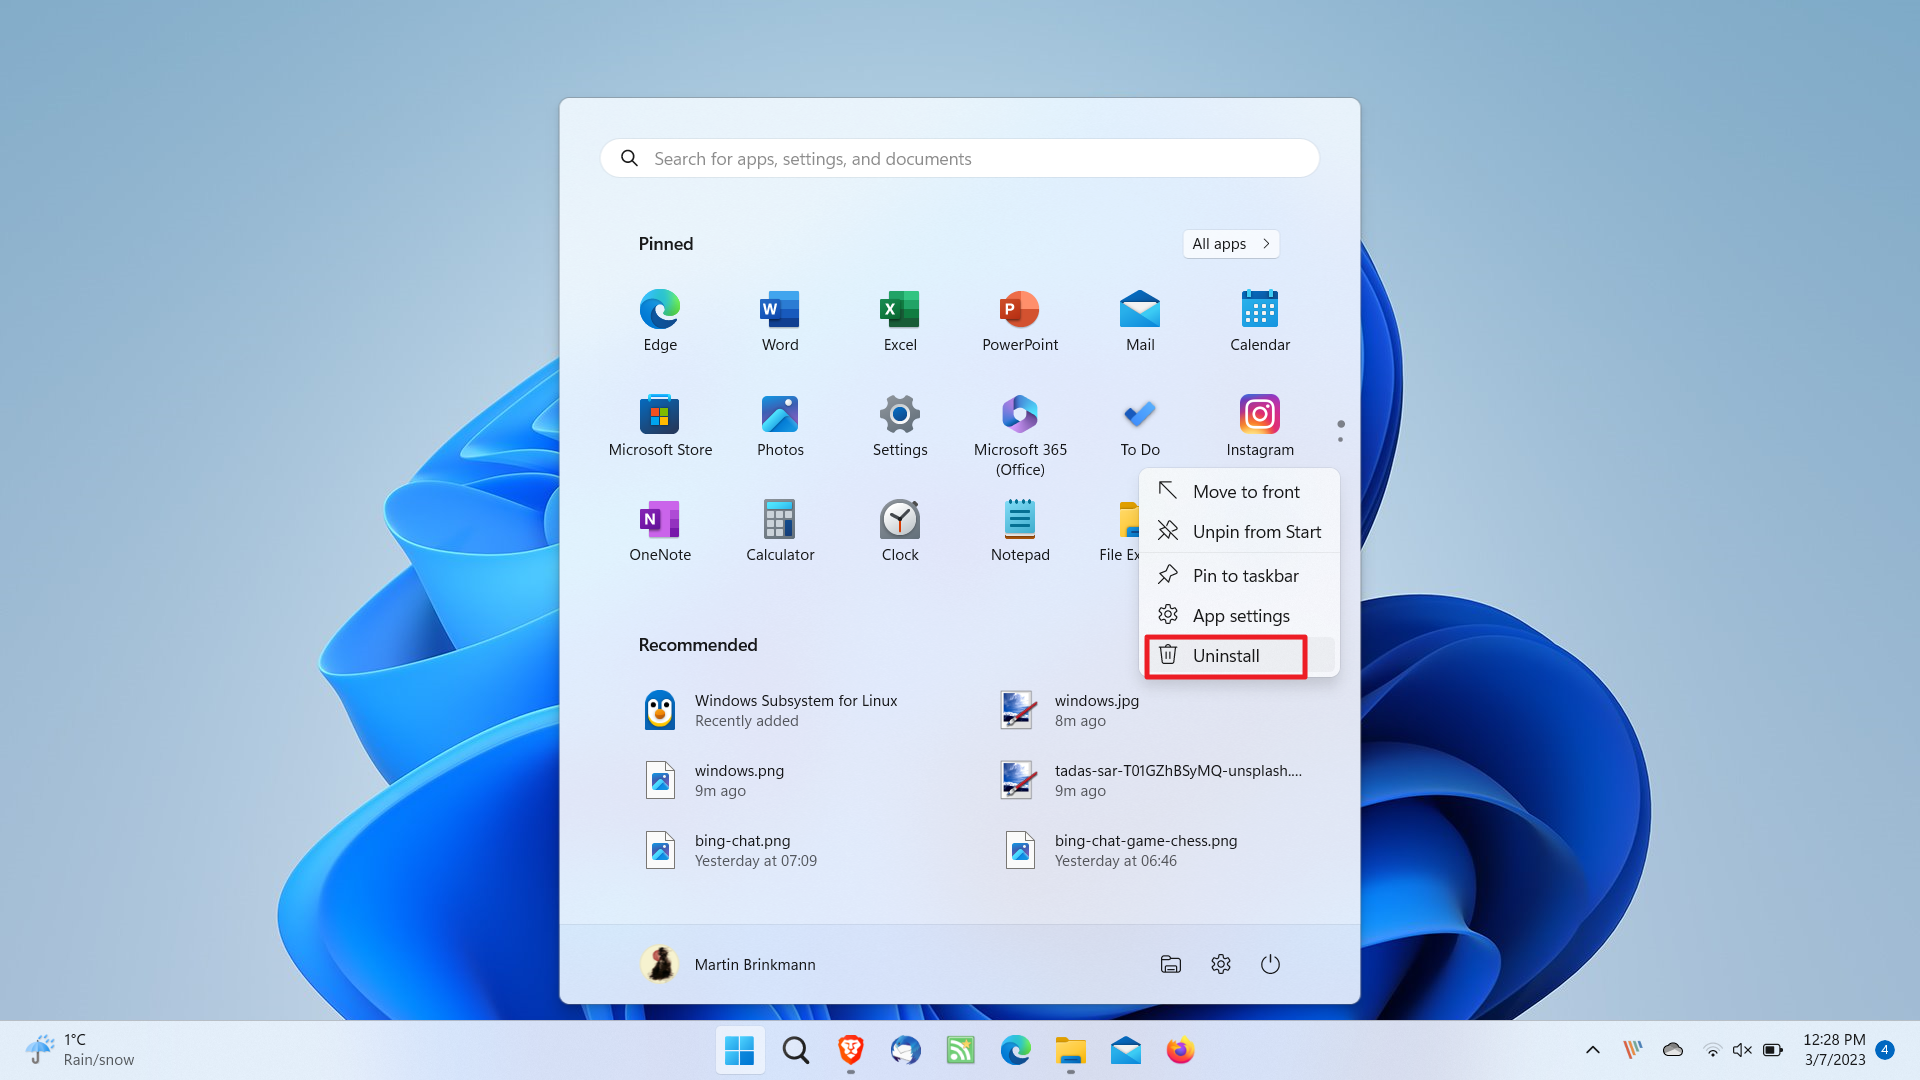 How to uninstall apps and programs in Windows 11 windows-11-uninstall-program-start-menu.png